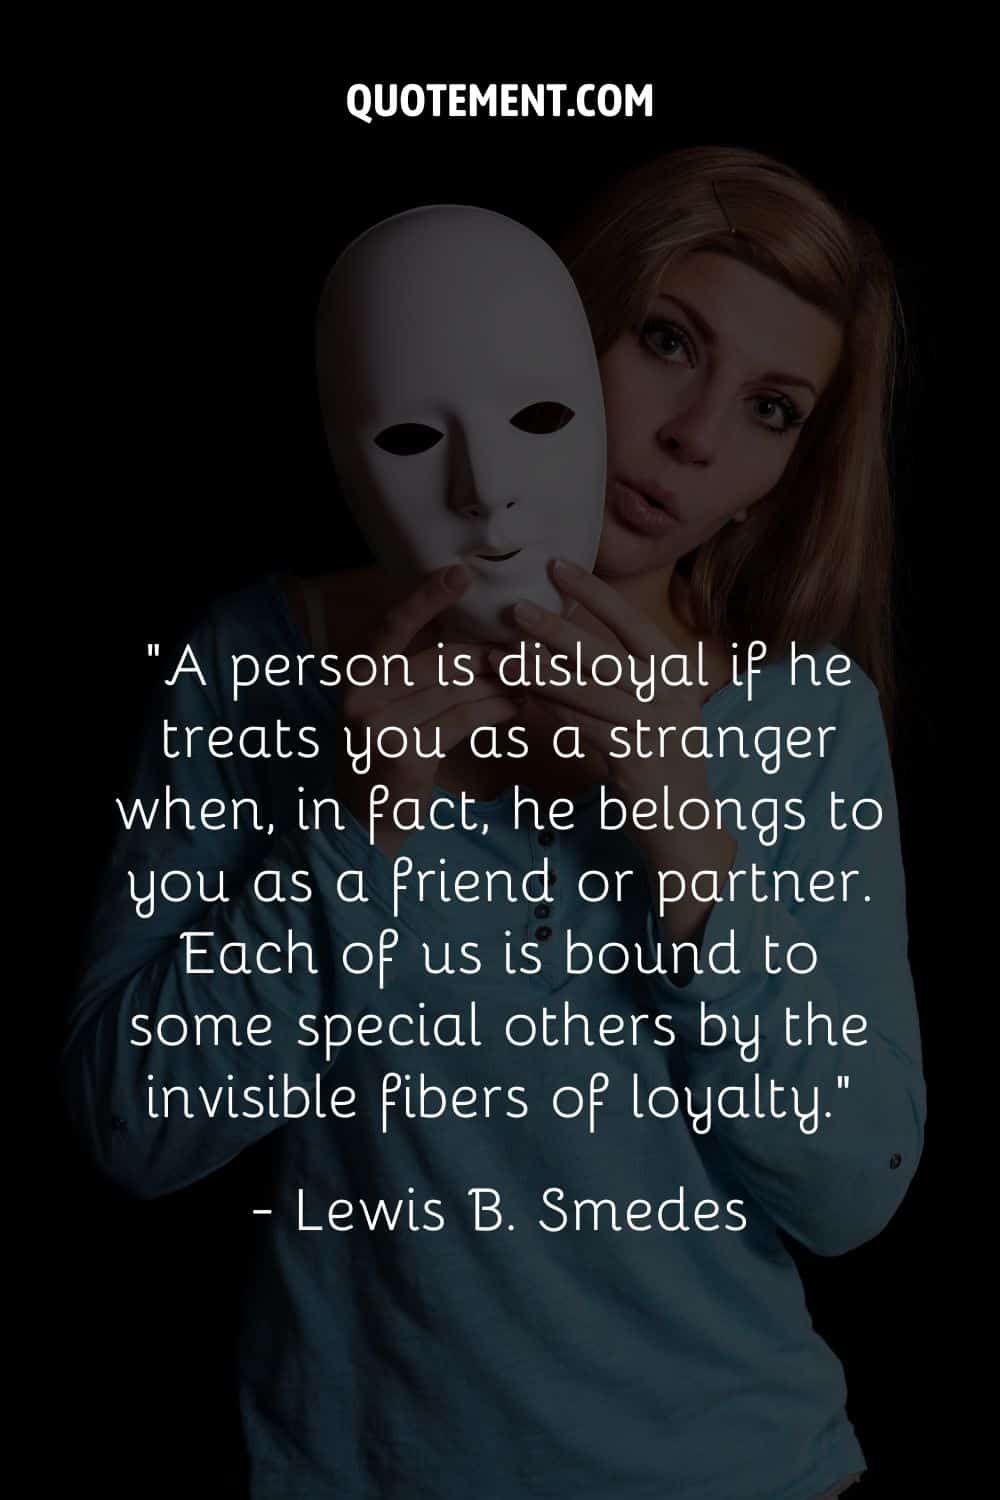 “A person is disloyal if he treats you as a stranger when, in fact, he belongs to you as a friend or partner.